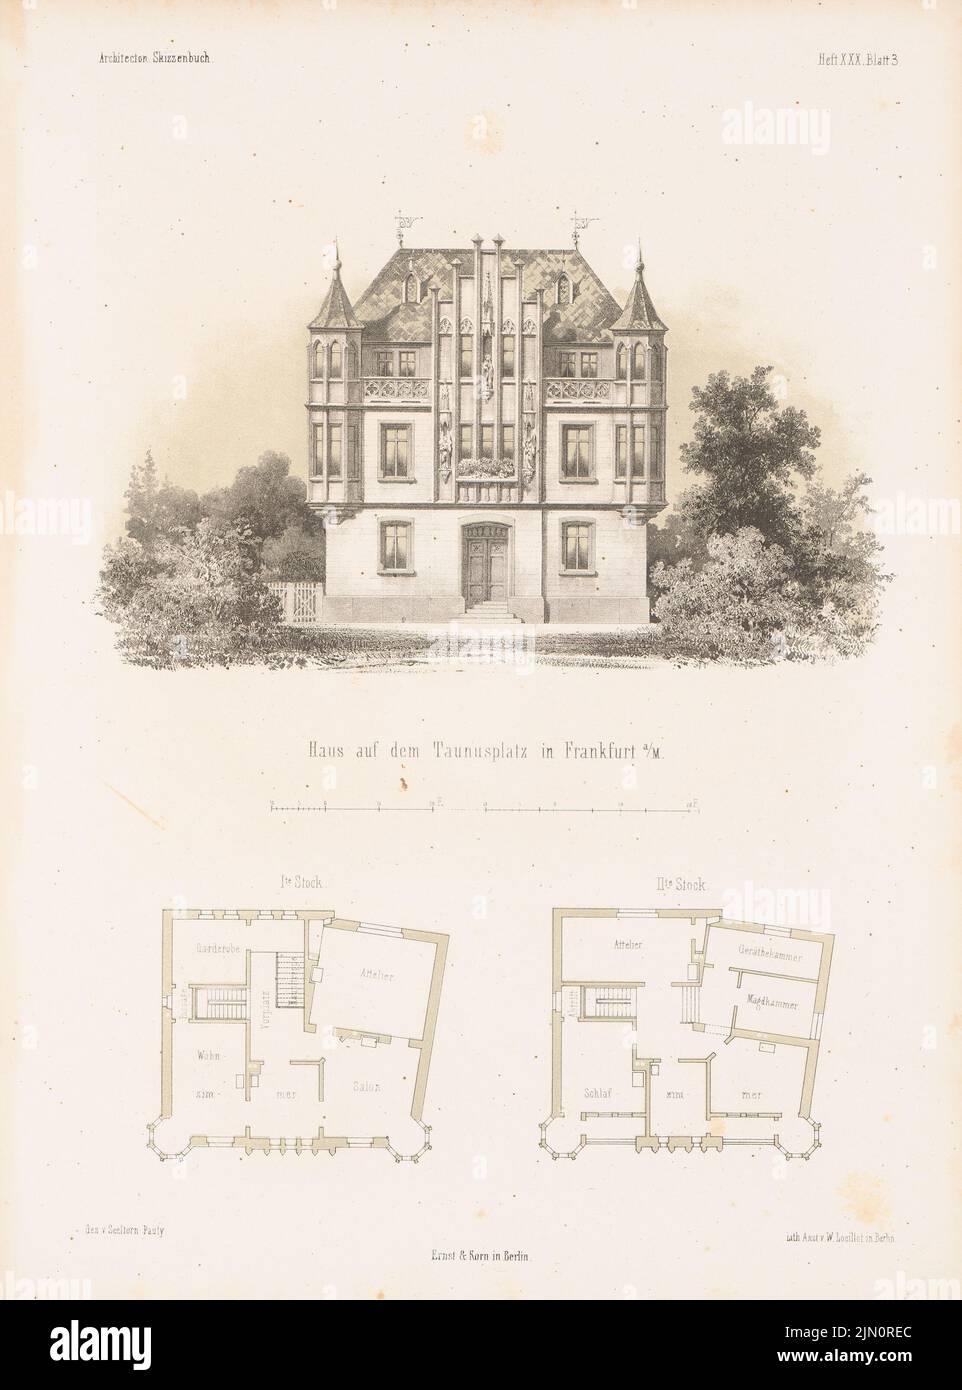 N.N., House on Taunus-Platz, Frankfurt/Main. (From: Architectural sketchbook, H. 30, 1857.) (1857-1857): floor plans, view. Lithography colored on paper, 66 x 48.9 cm (including scan edges) N.N. : Haus auf dem Taunus-Platz, Frankfurt/Main. (Aus: Architektonisches Skizzenbuch, H. 30, 1857) Stock Photo